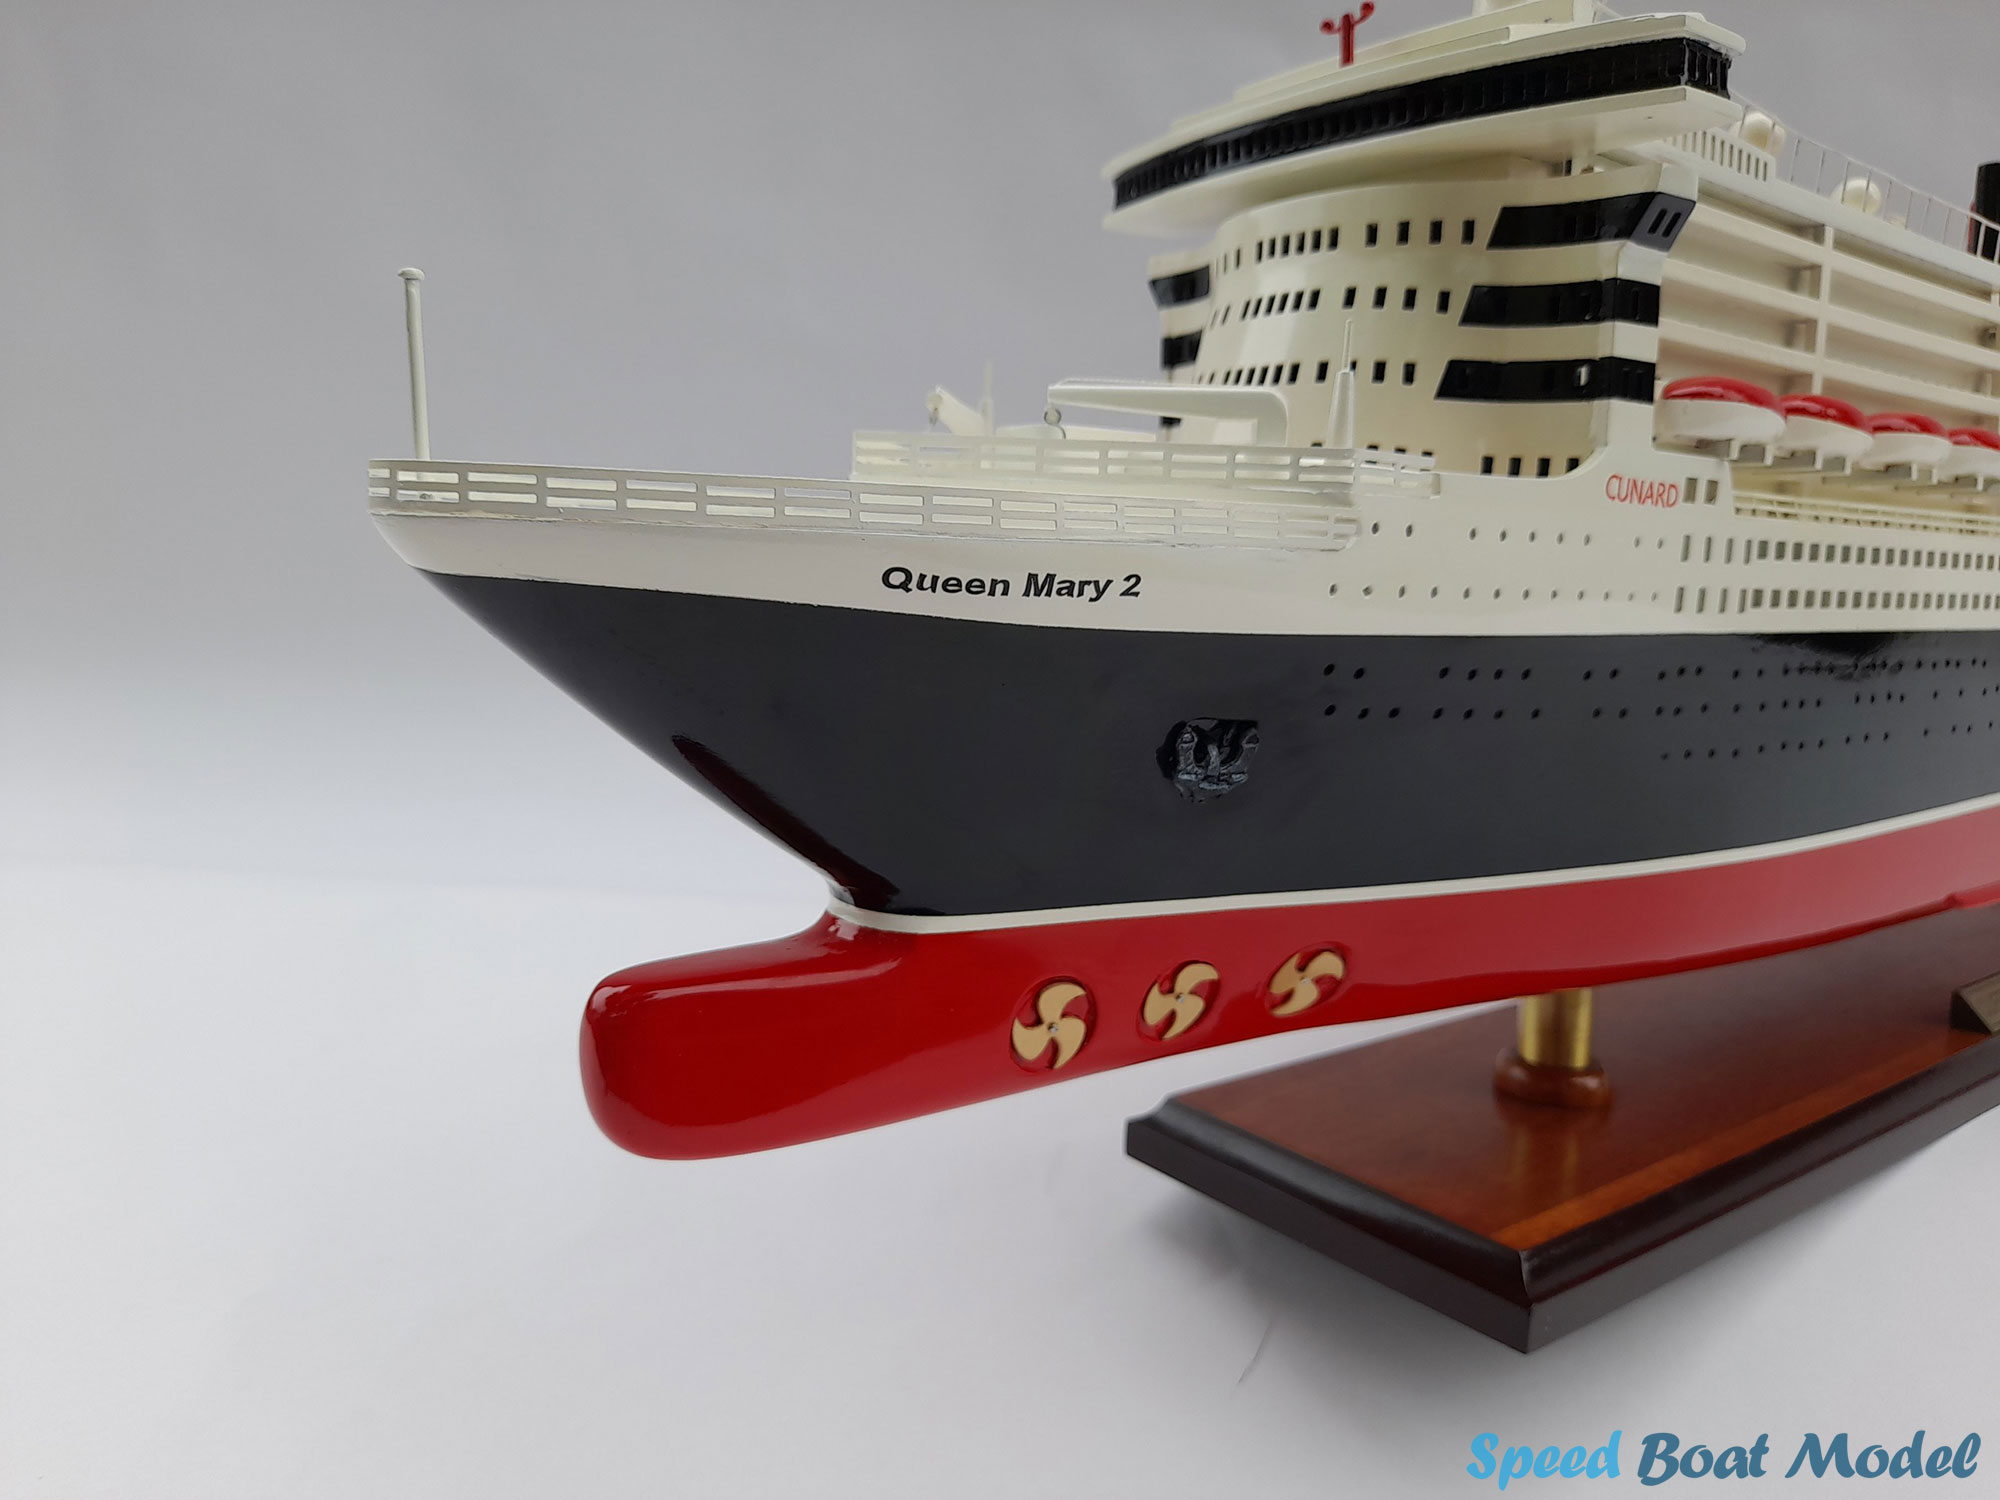 Rms Queen Mary 2 Cruise Liner Model 39.3"